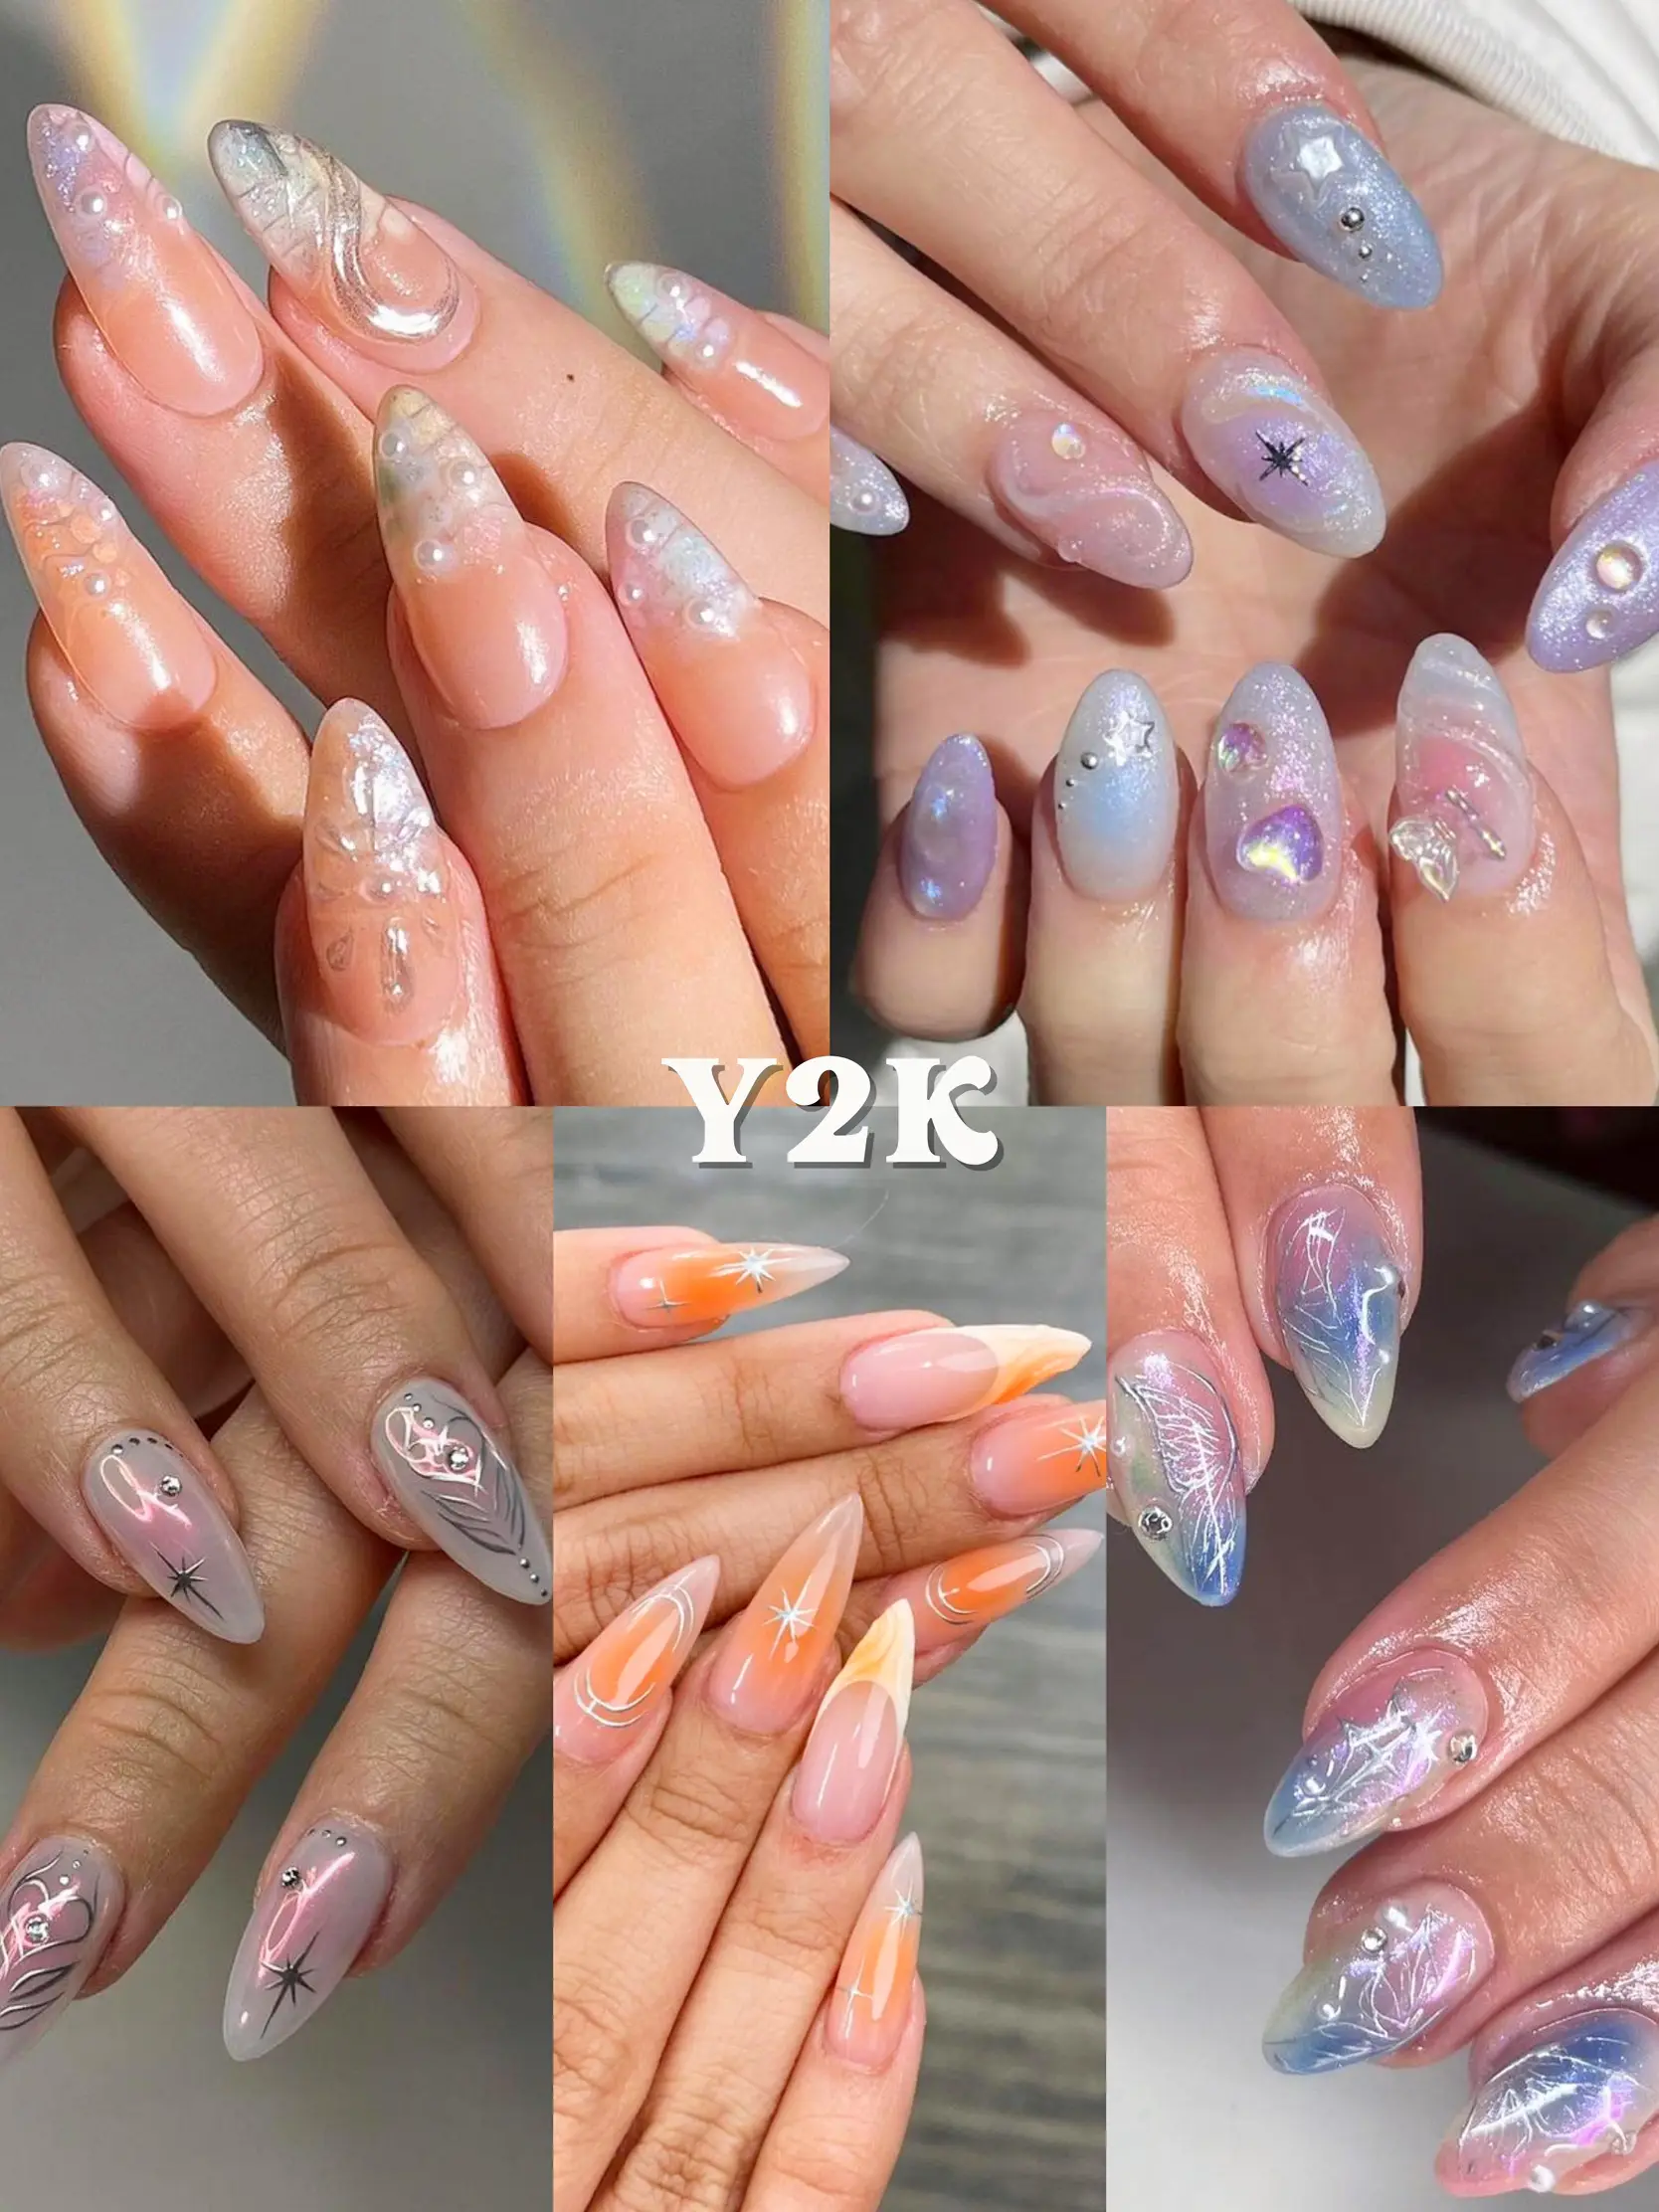 JIN.B Crazy Top Thick Gel - 25g  Korean Nail Supply for Europe